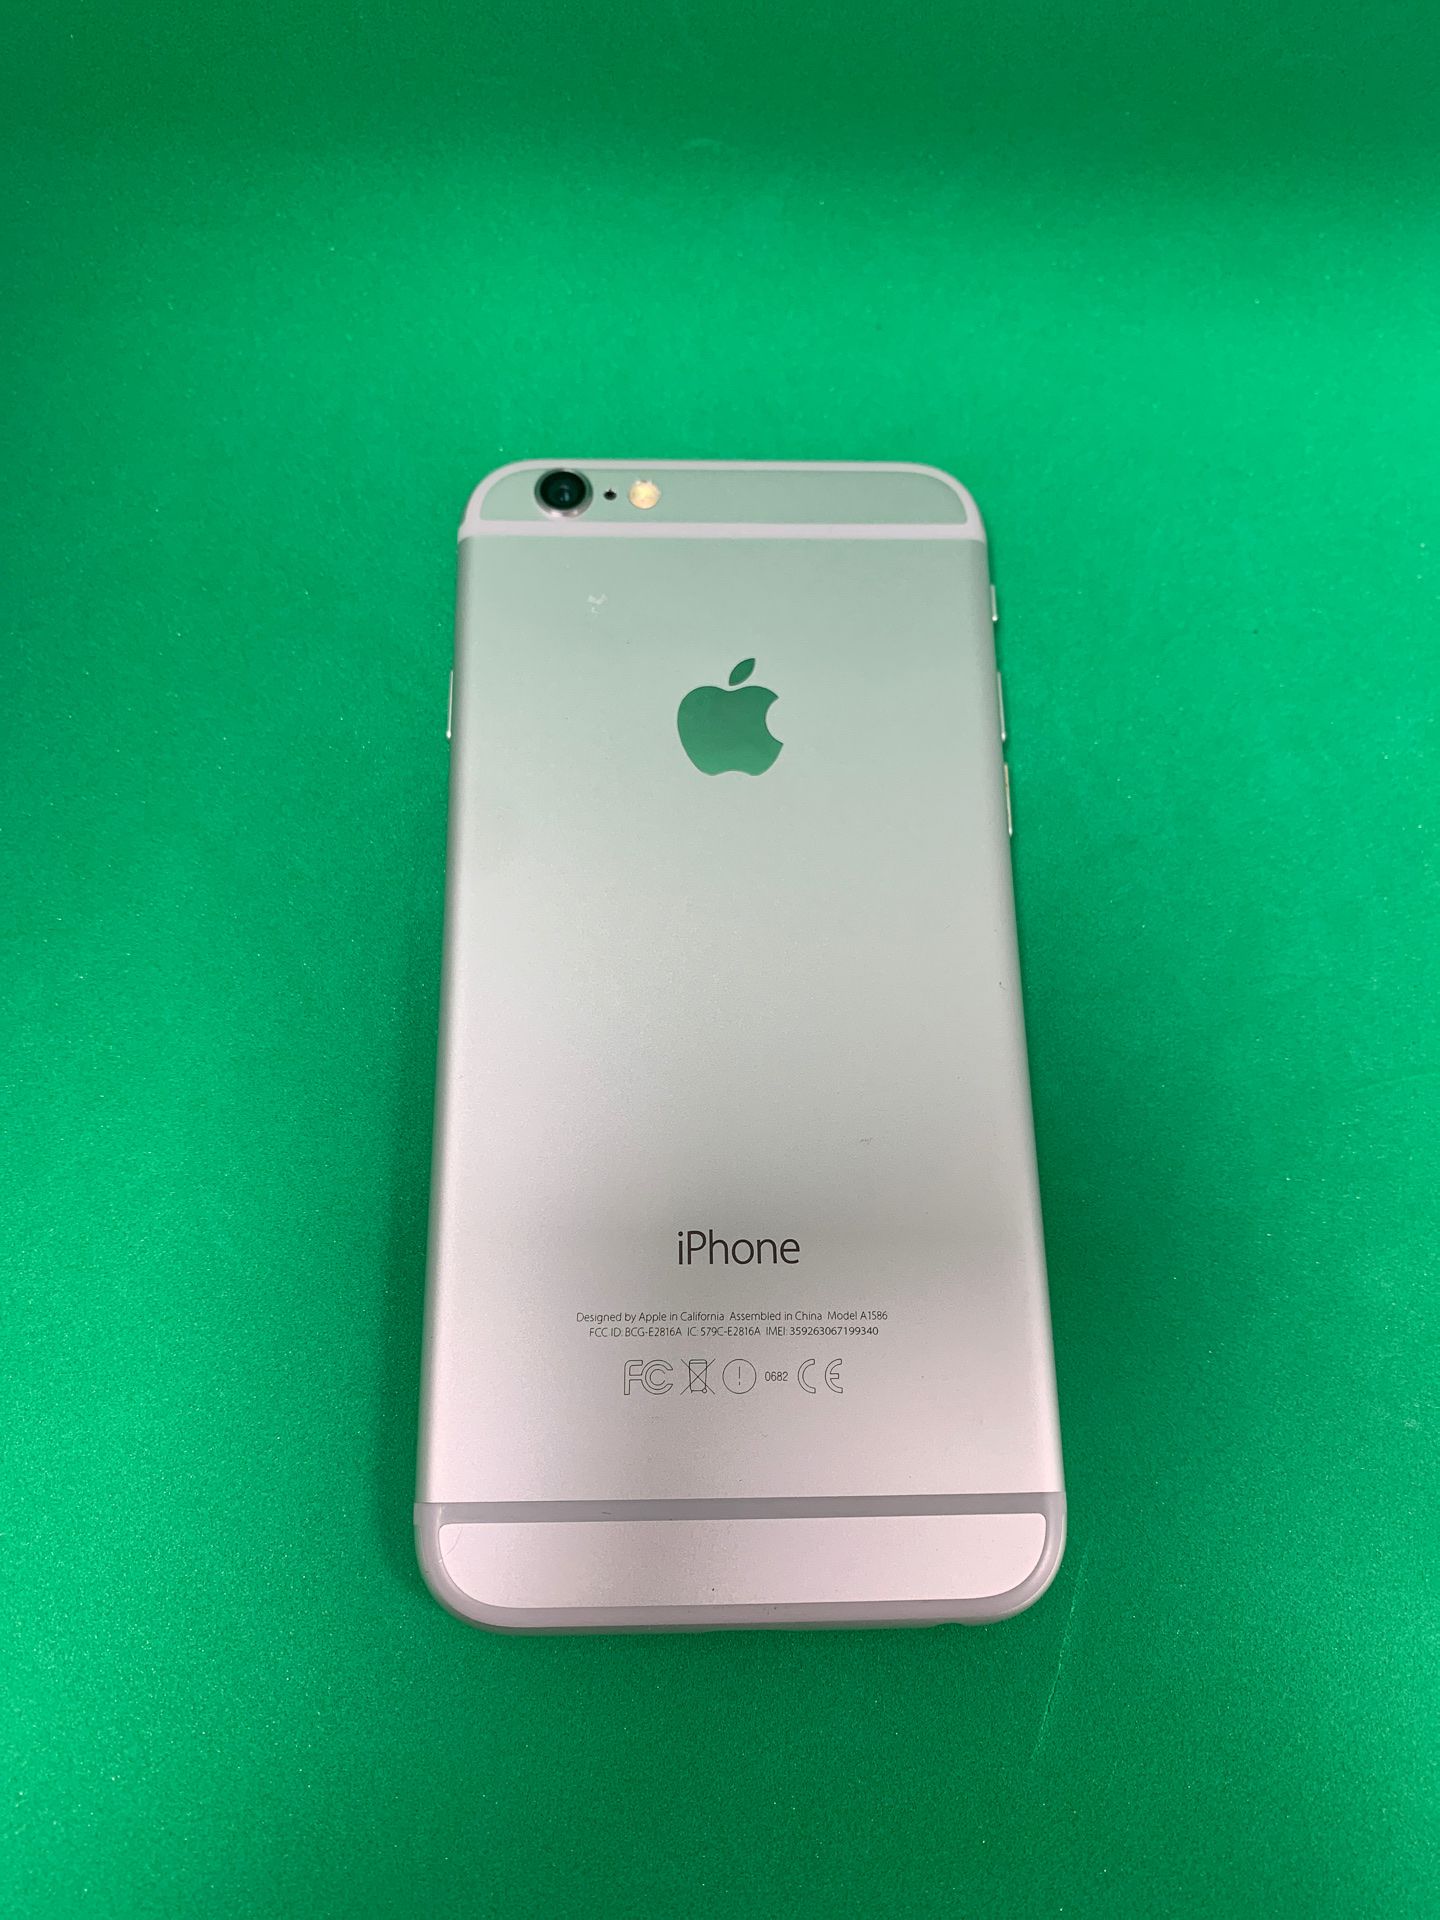 iPhone 6 Silver 16GB For T-Mobile,Simple Mobile,Metro PCs